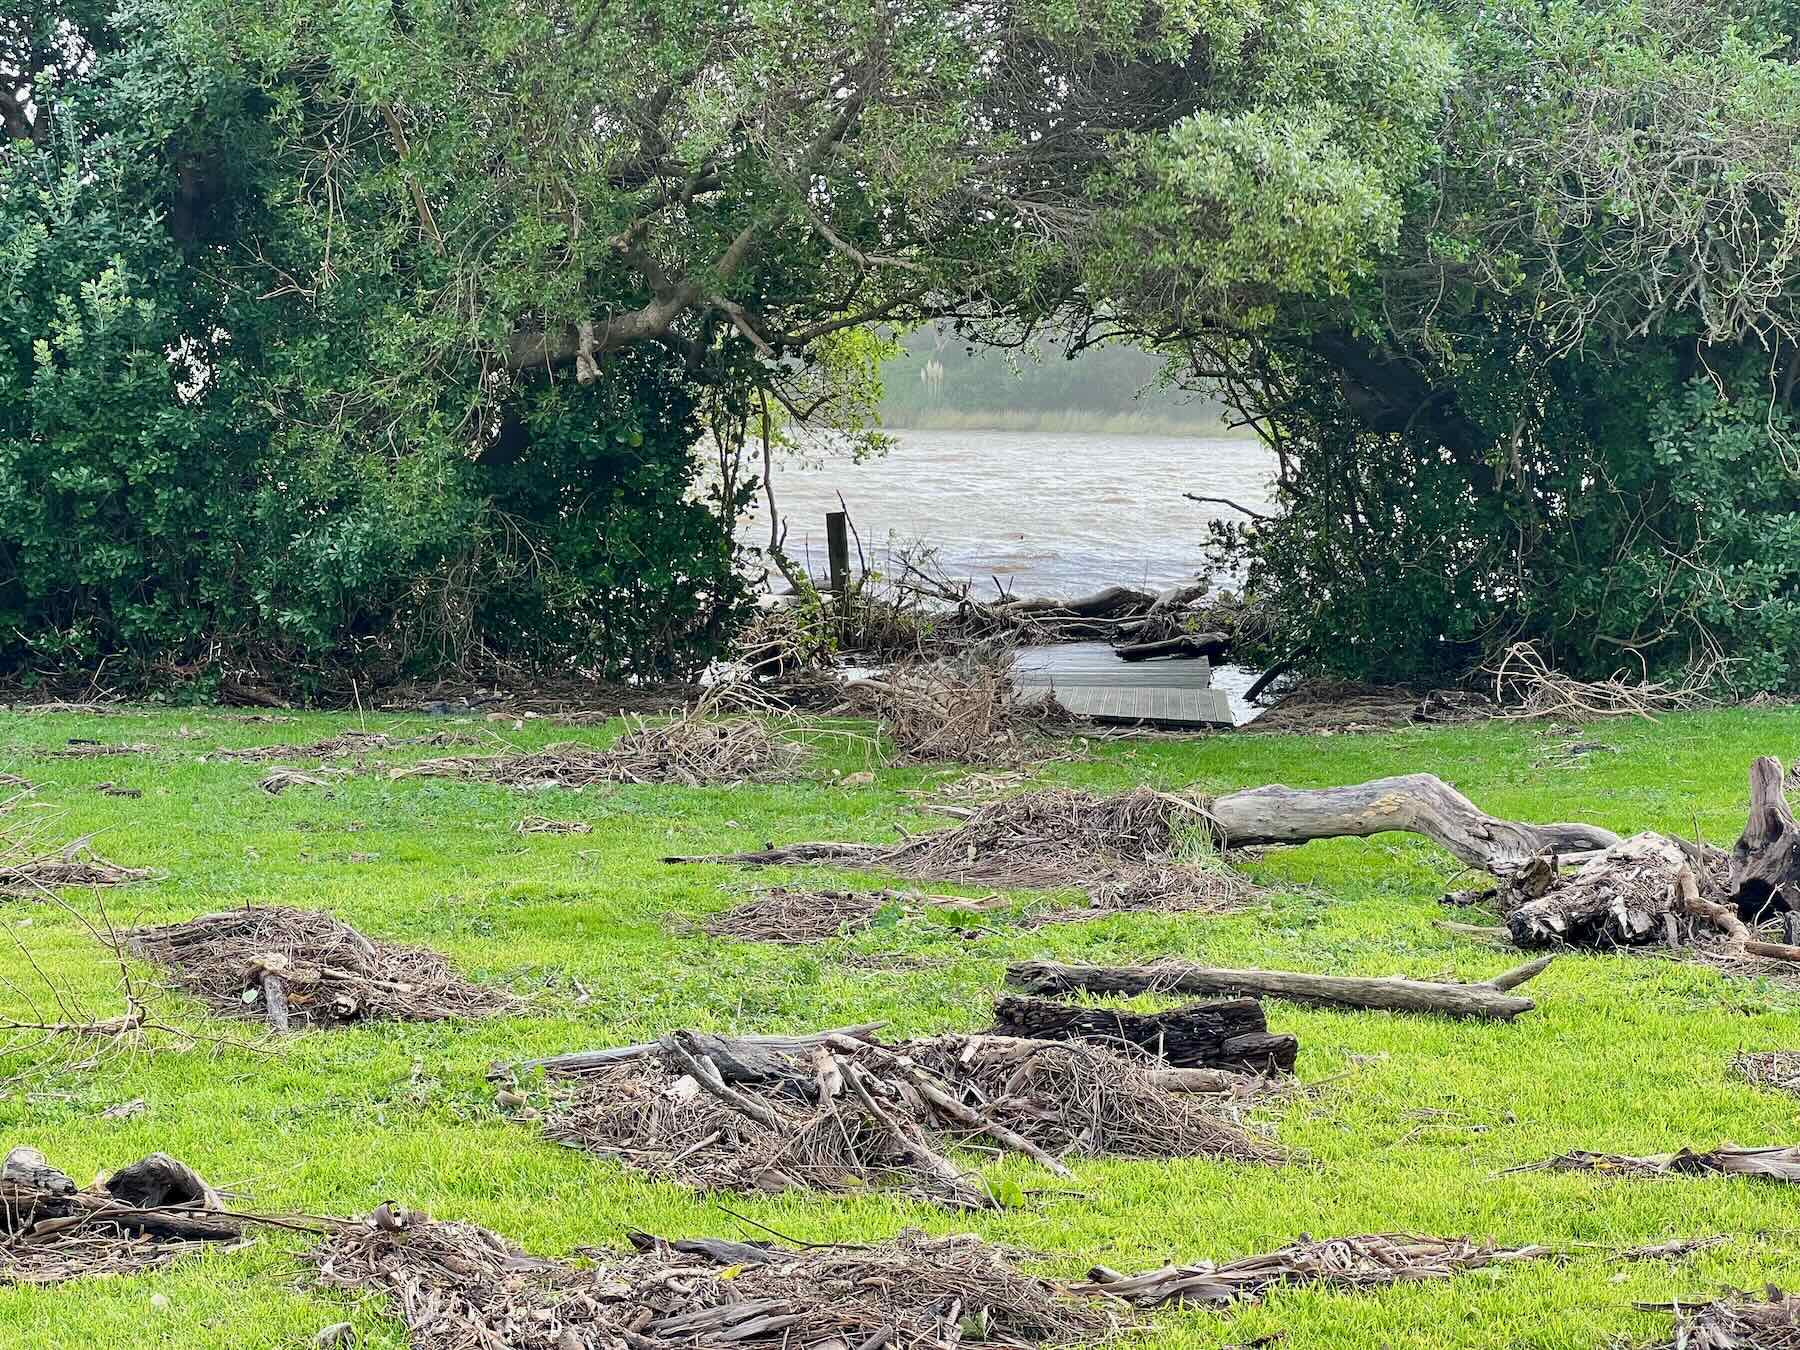 Wider view of driftwood on the grass with very high river in background. 